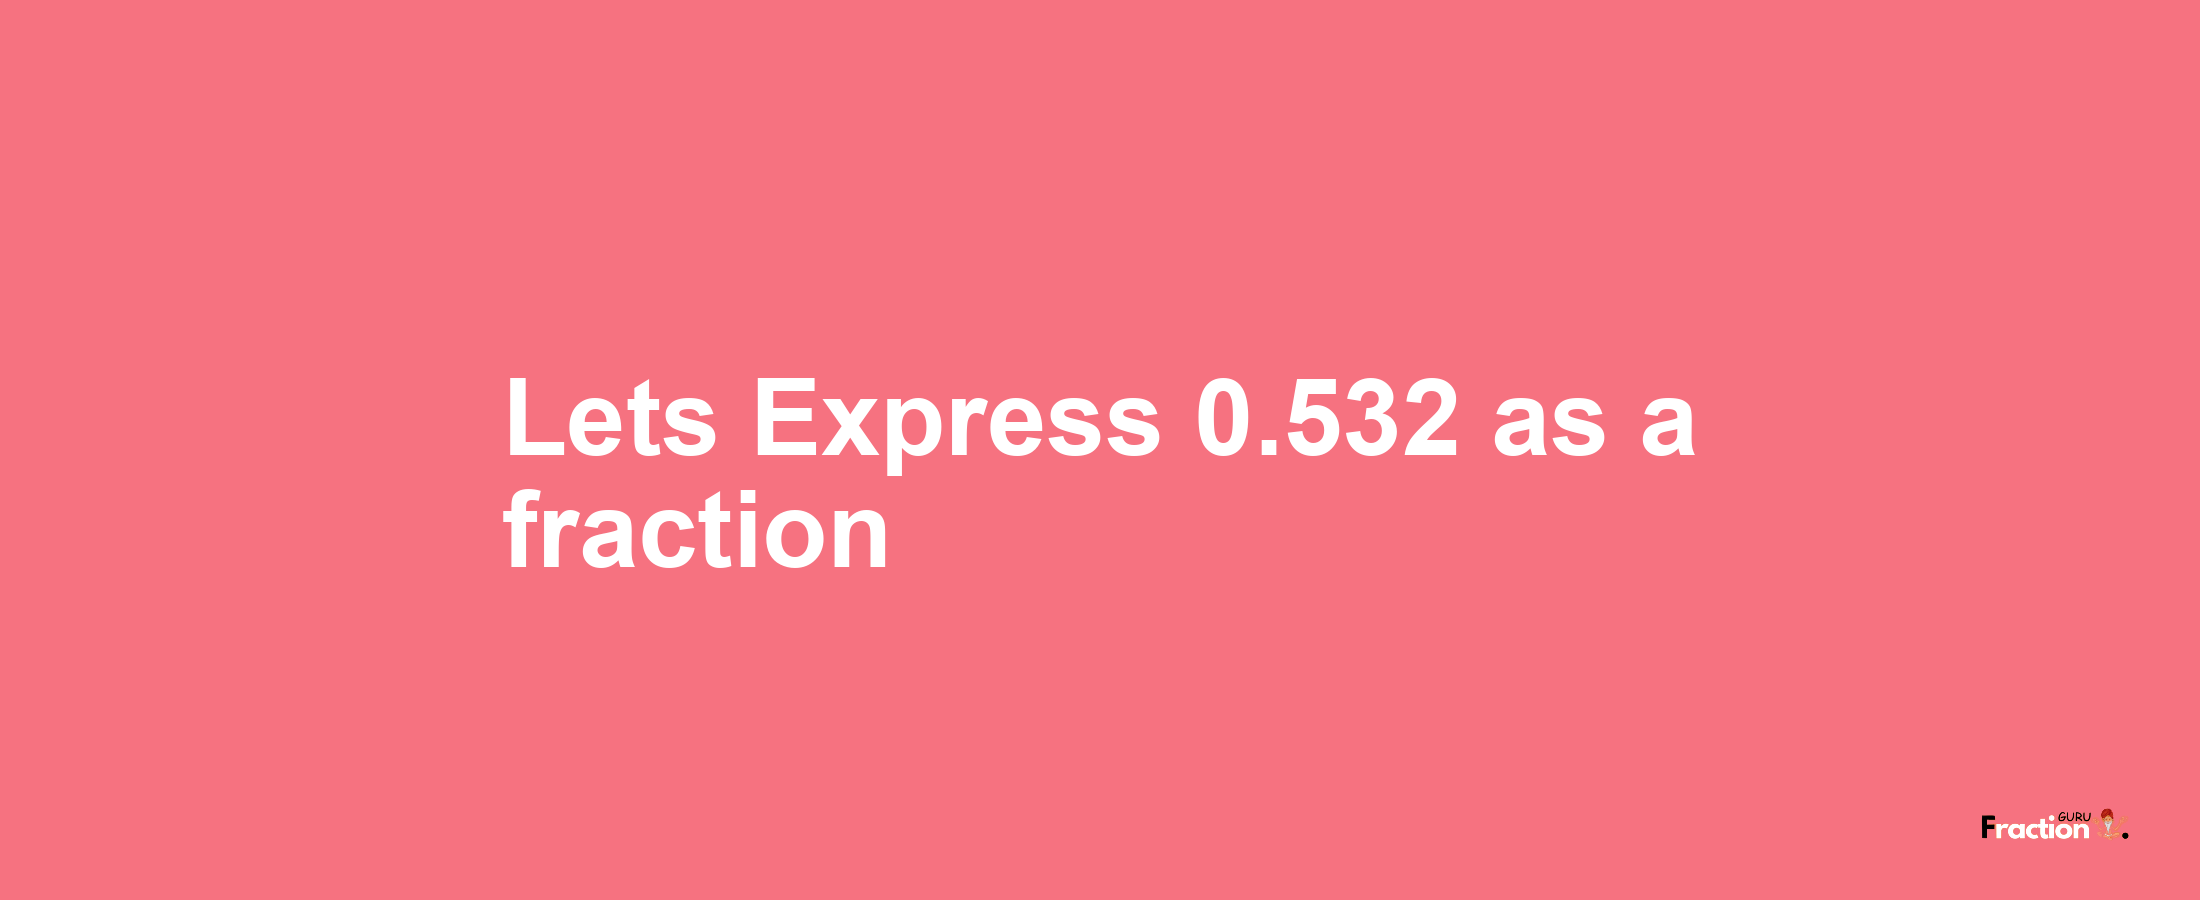 Lets Express 0.532 as afraction